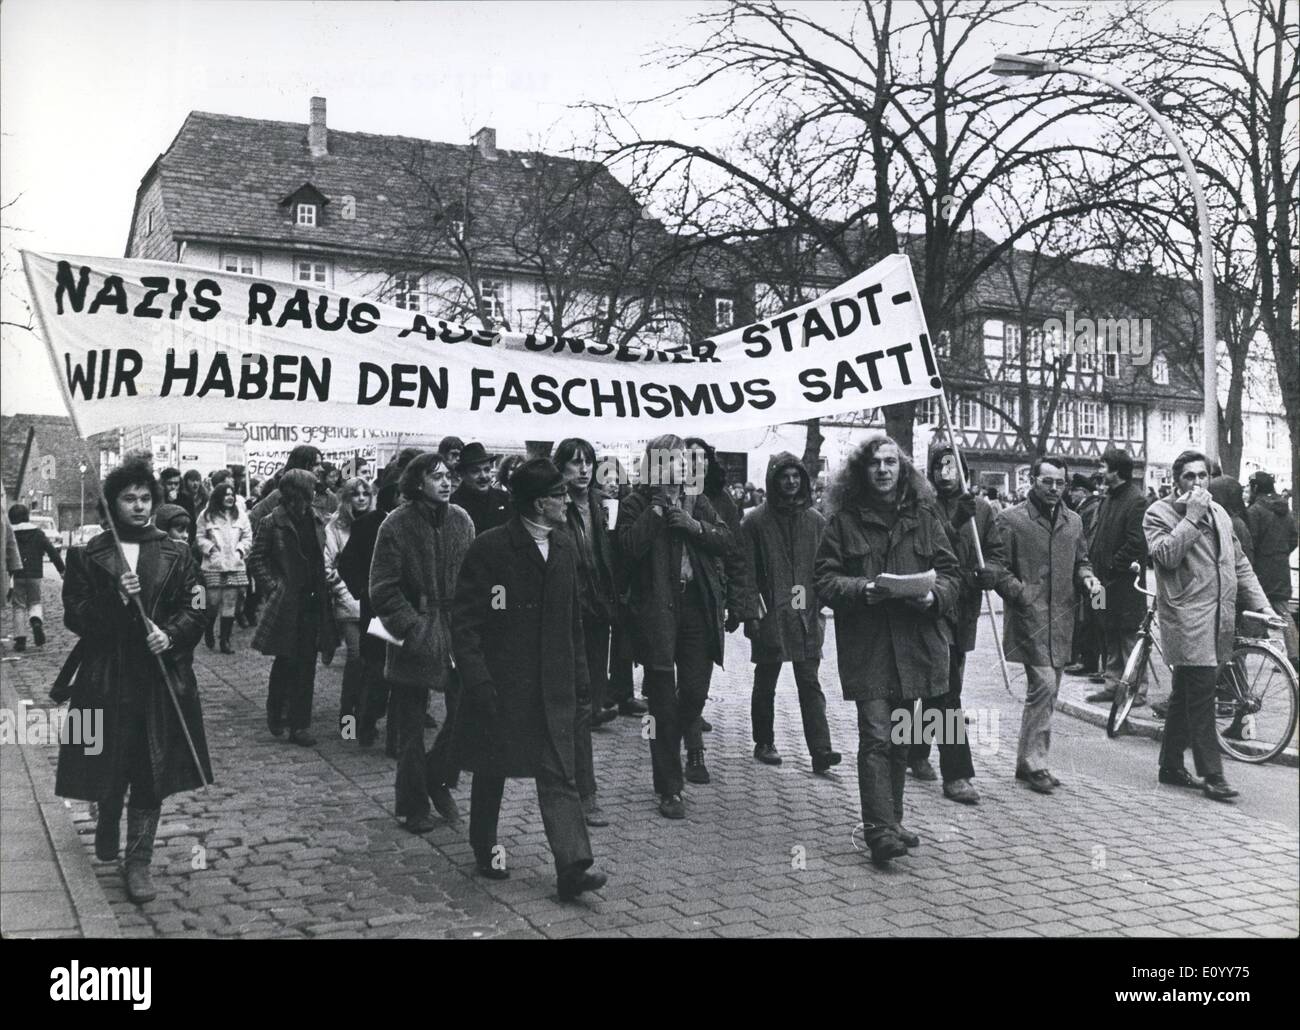 Nov. 11, 1971 - Party Conference of the NPD - West Germany's right extremists: From November 19th to 21st, 1971, The National Democratic Party of Germany, widely regarded as neo-Nazi, held their annual party conference in Holsminden, Lower Saxony, in the North West of the Federal Republic. Their election successes of a few years ago have recently suffered some severe reversals which led to a split in the party leadership Stock Photo